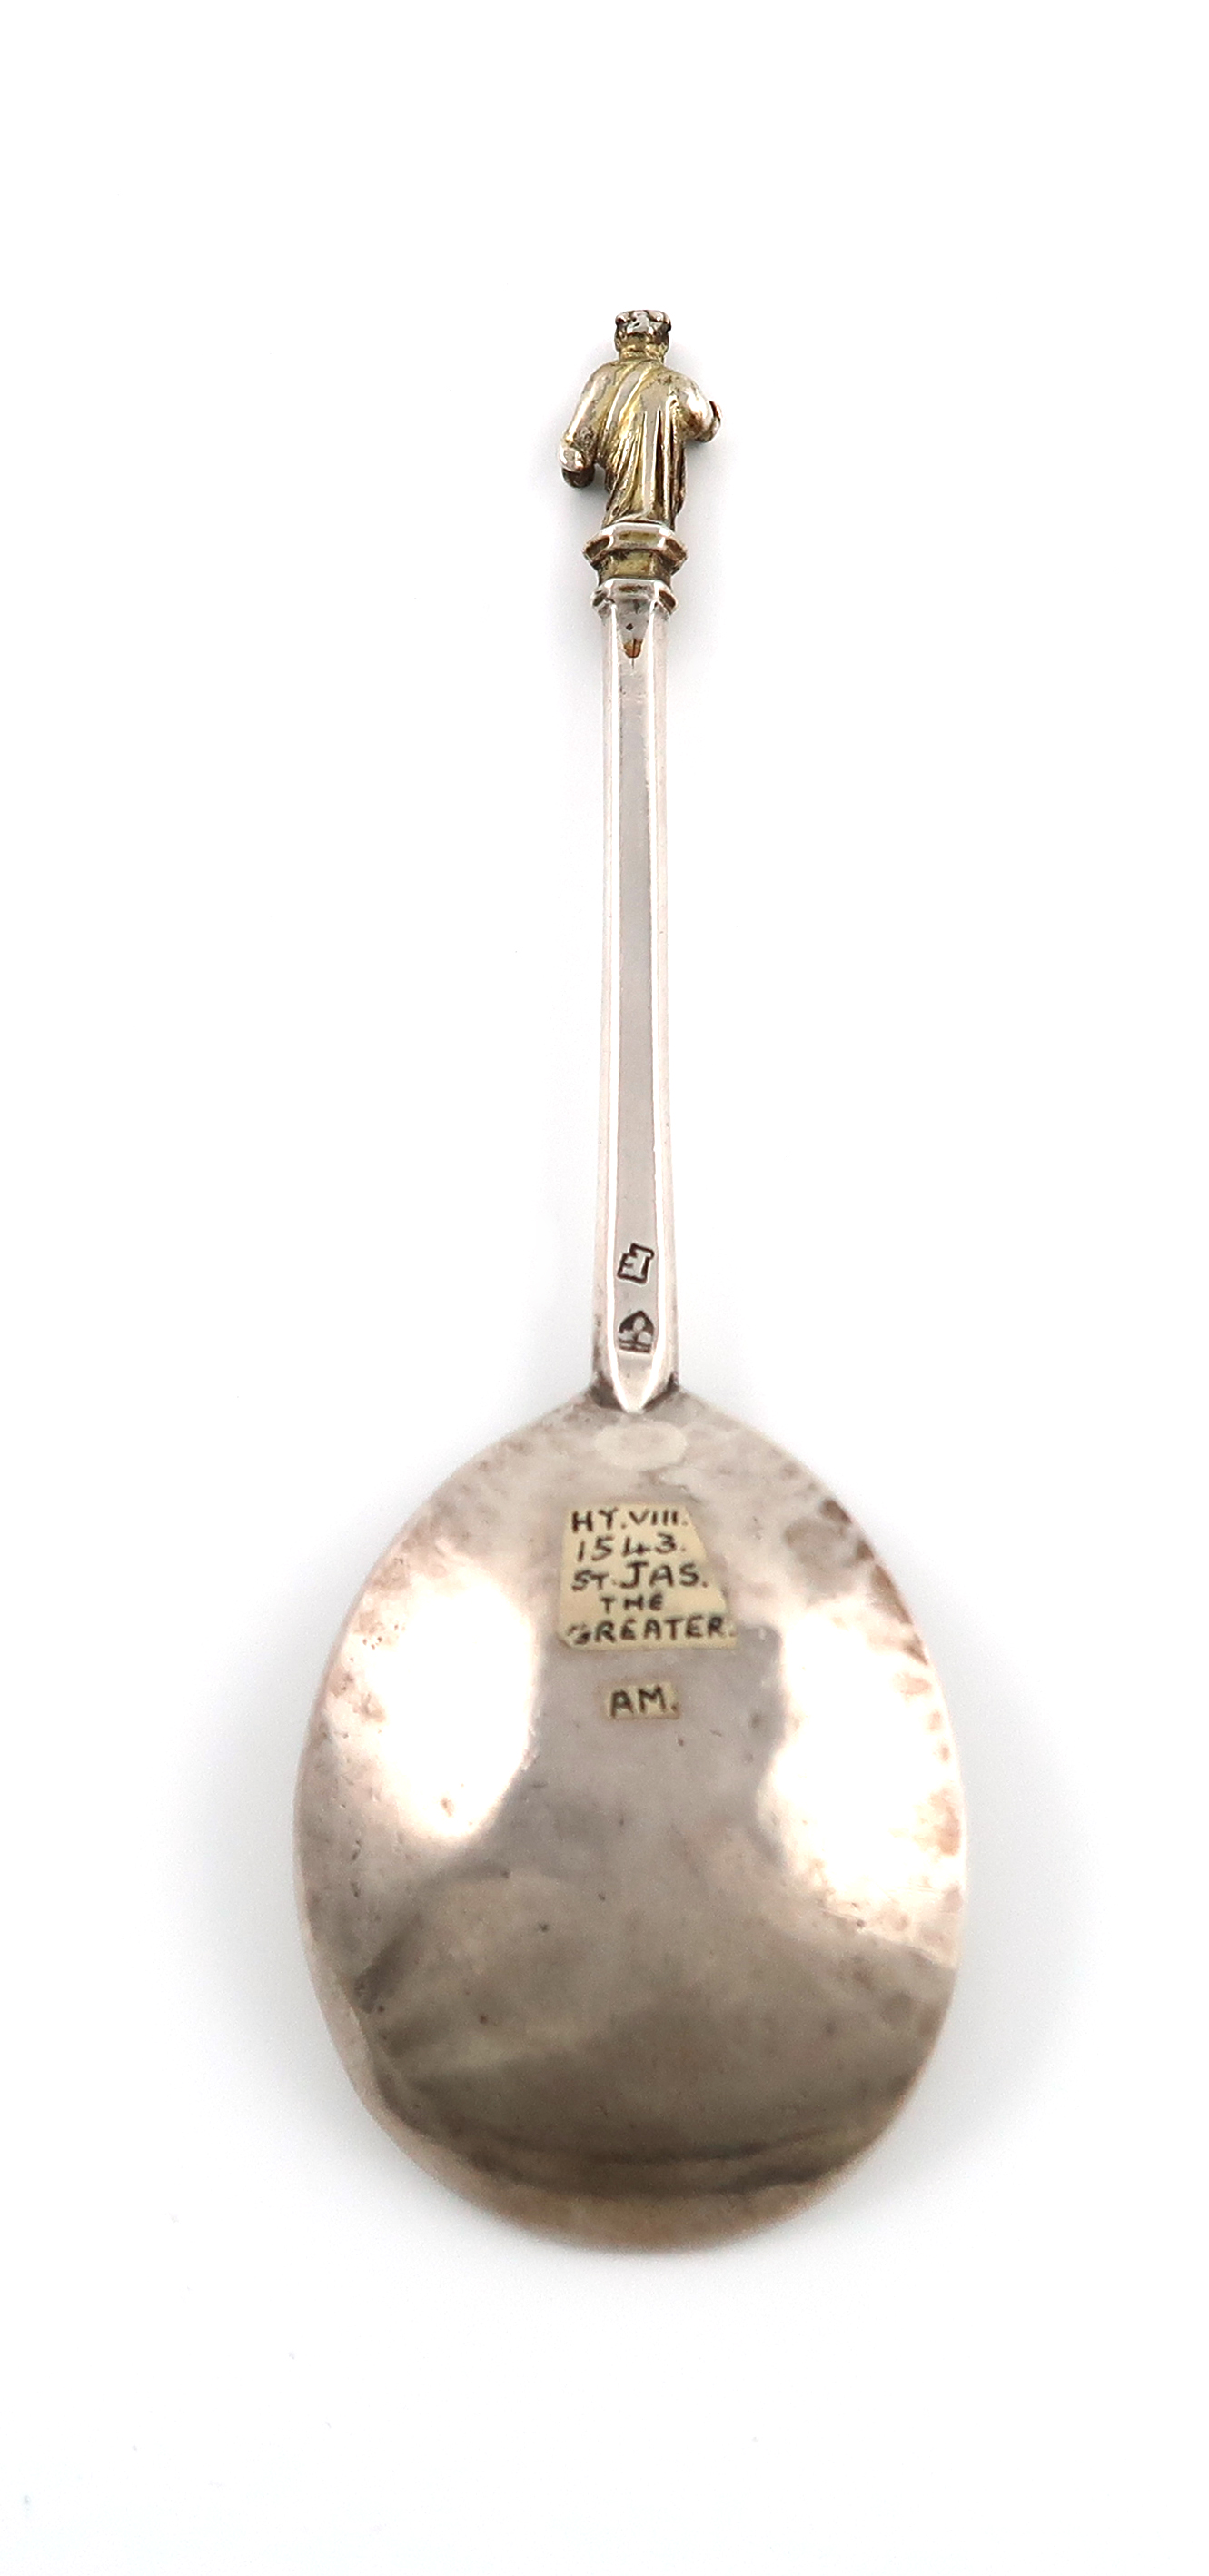 A Henry VIII silver Apostle spoon, possibly St. James the Greater,maker's mark of a device, London - Image 6 of 8